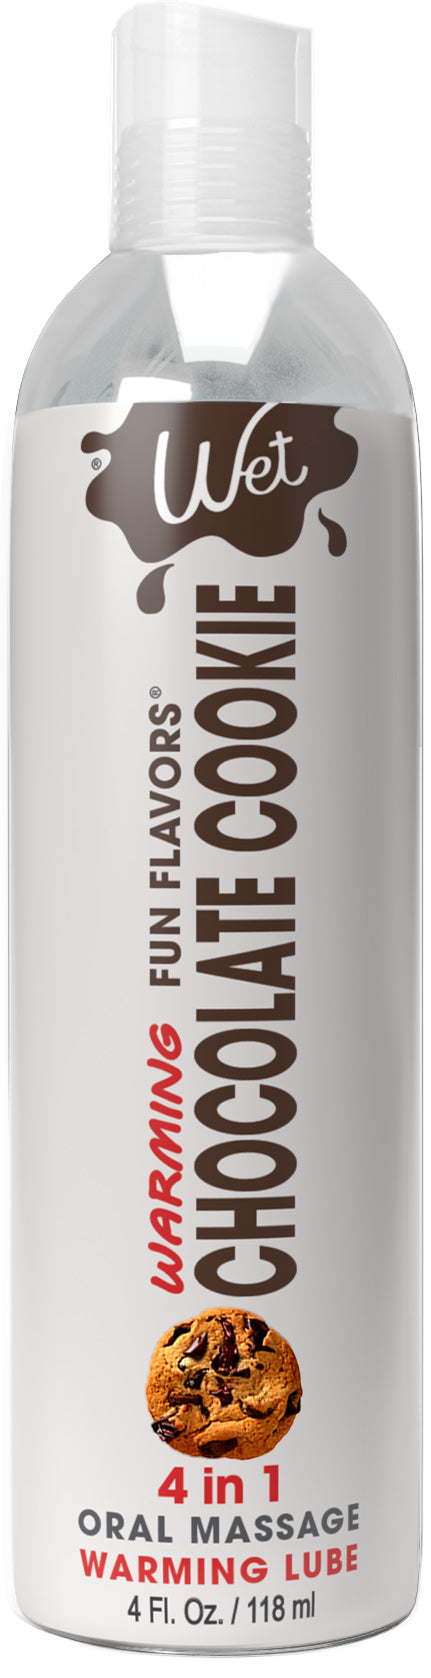 Wet Warming Fun Flavors - Chocolate Cookie - 4 in  1 Lubricant 4 Oz WT21584